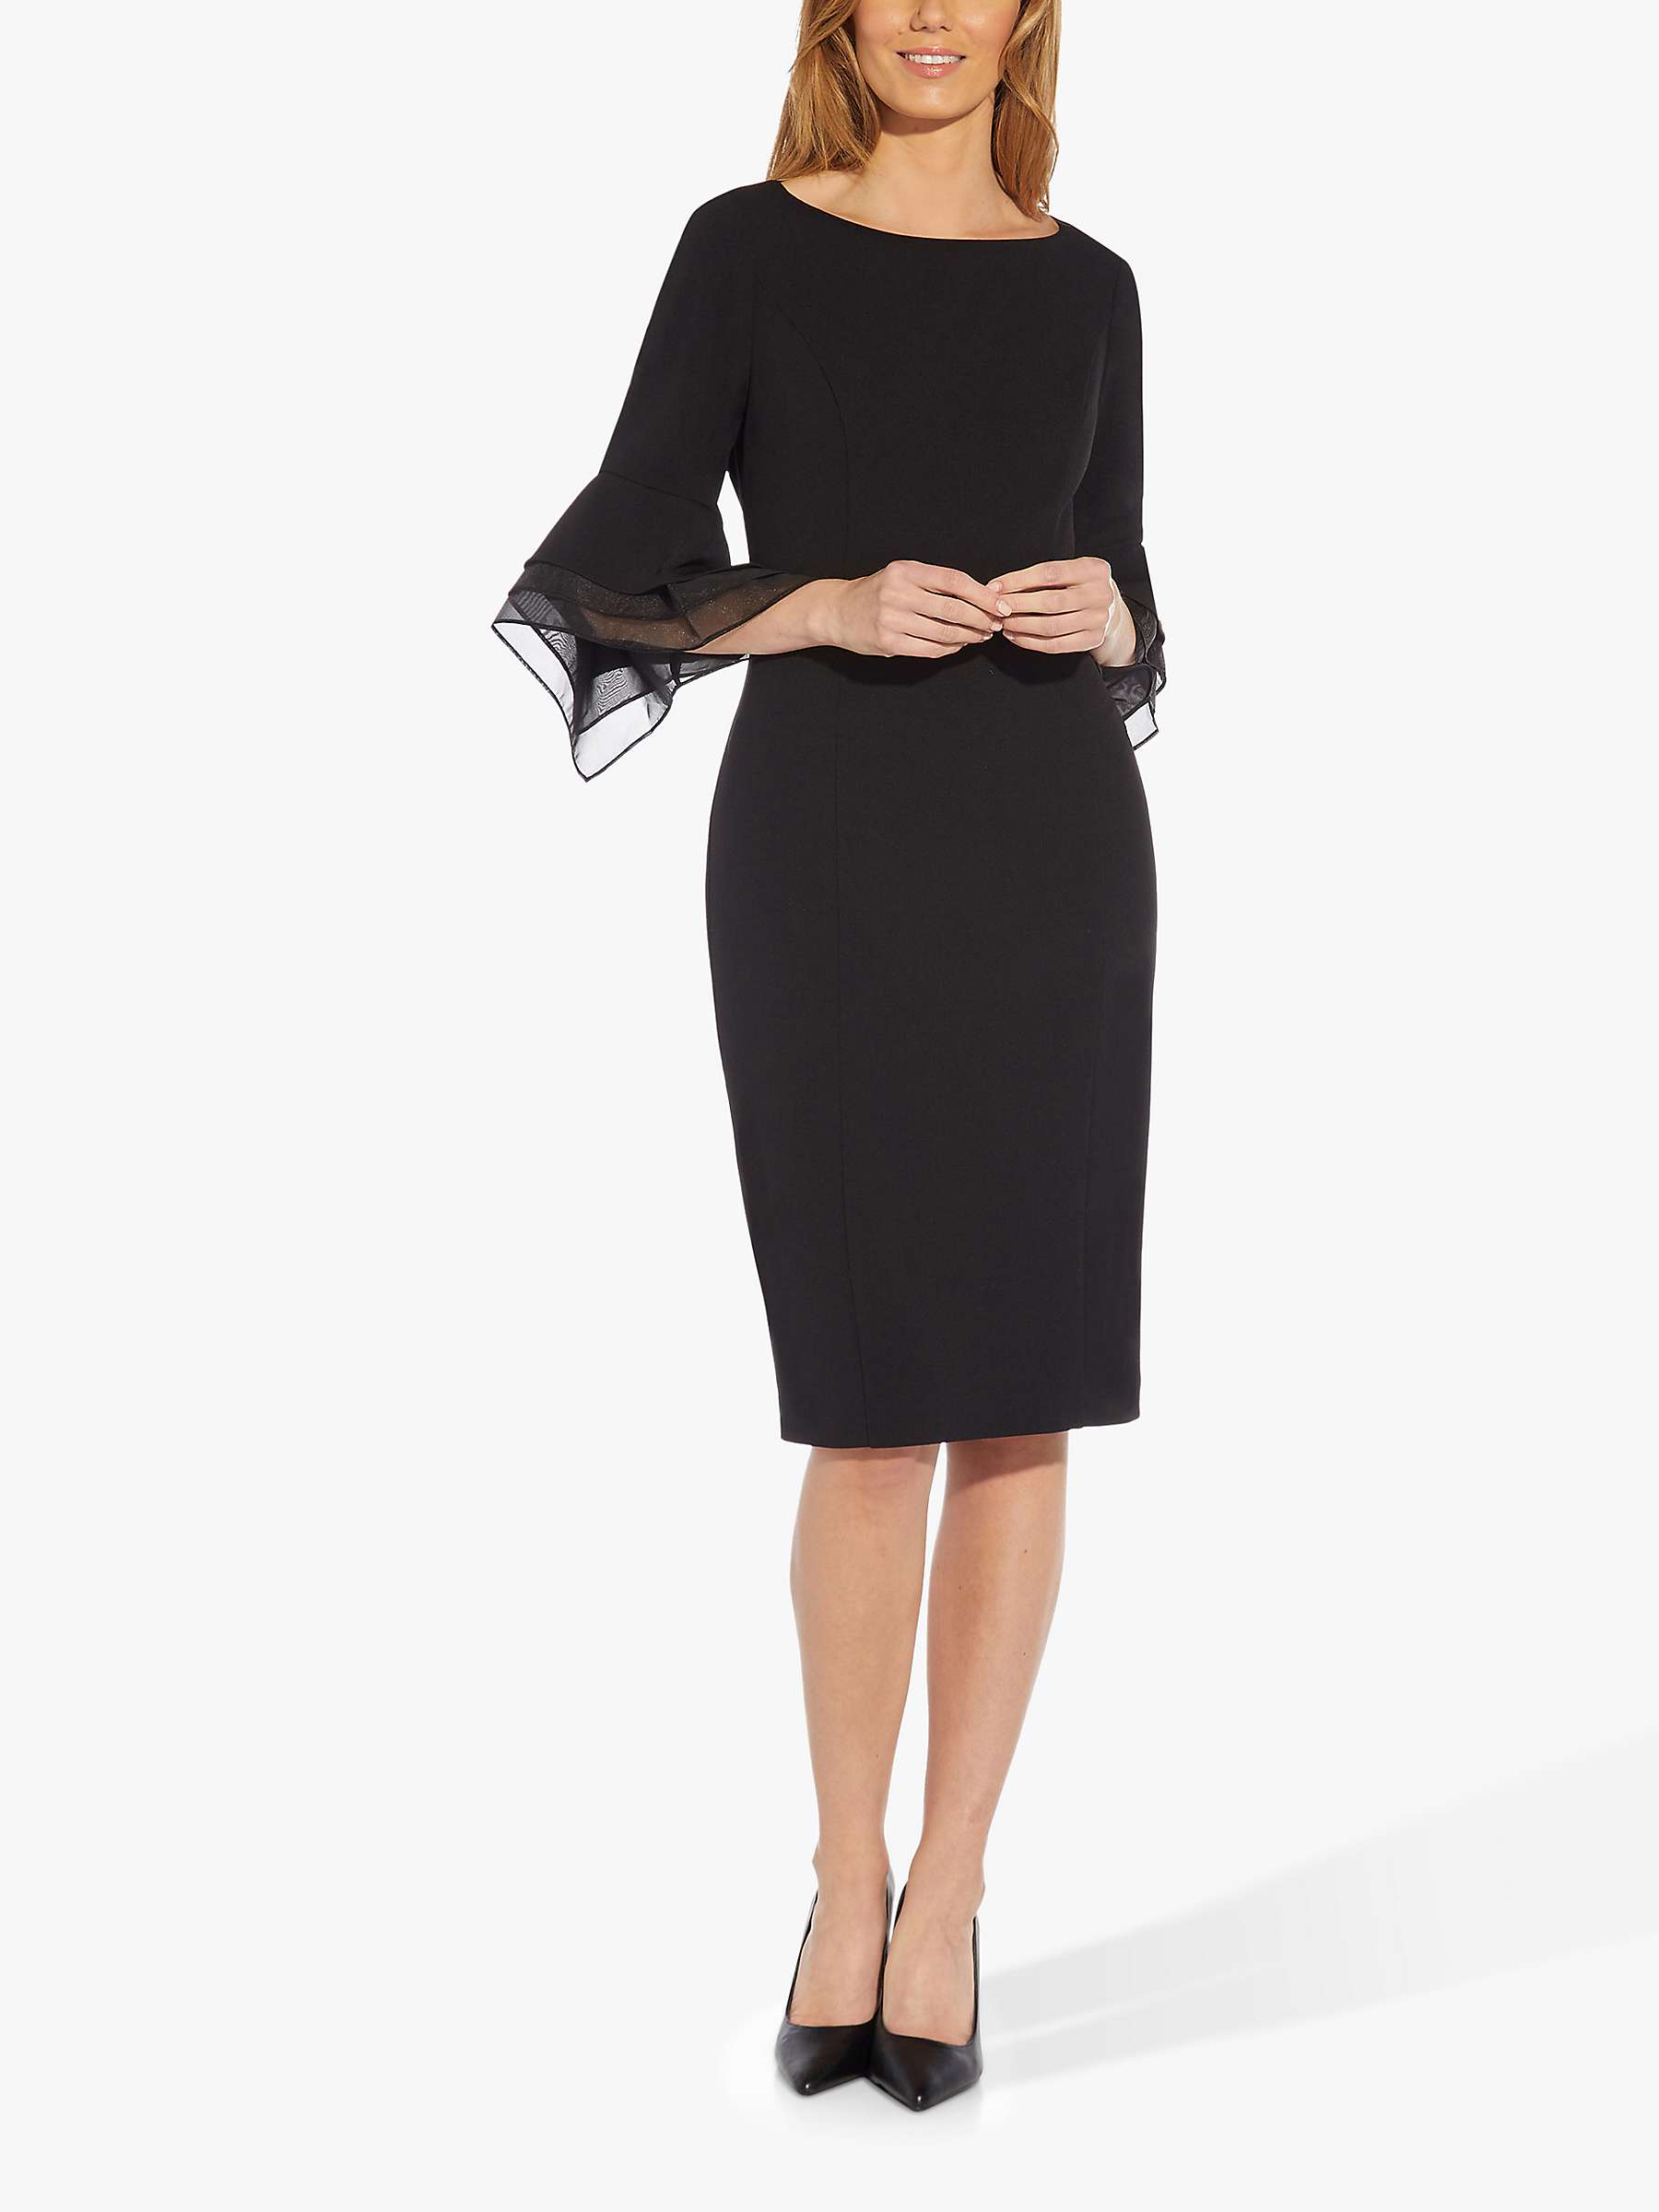 Buy Adrianna Papell Knit Crepe Tiered Knee Length Dress Online at johnlewis.com